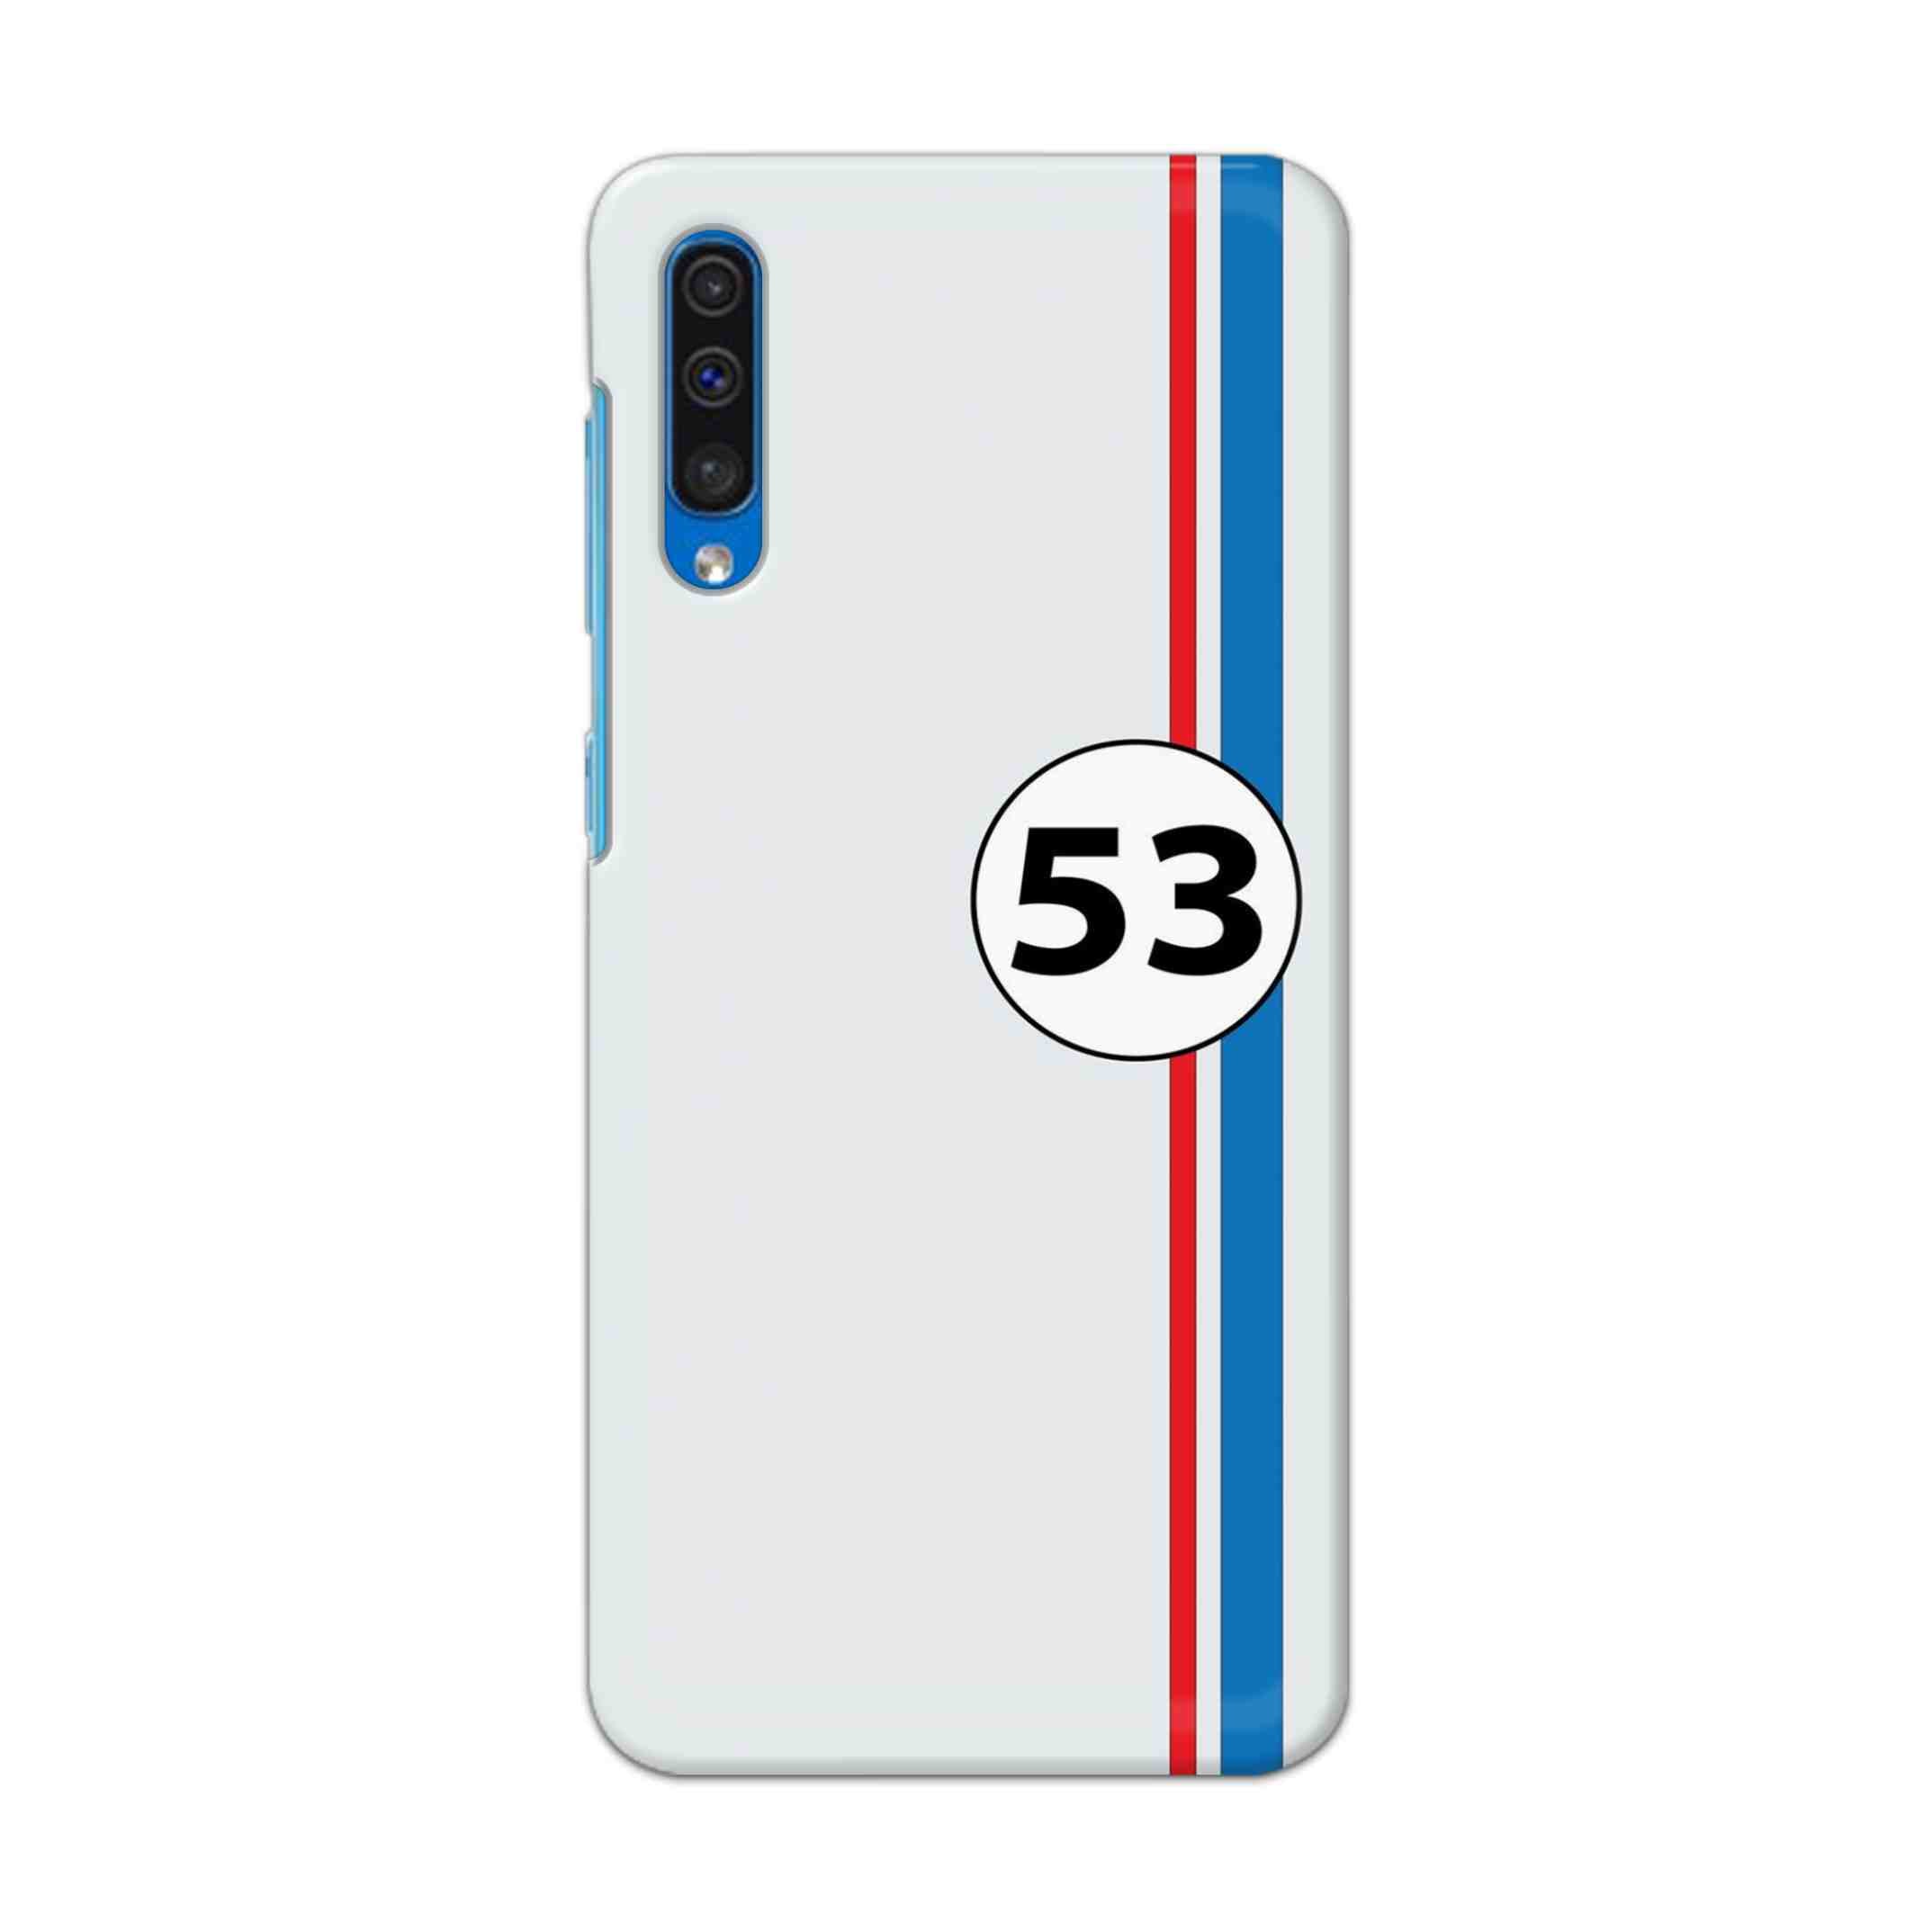 Buy 53 Hard Back Mobile Phone Case Cover For Samsung Galaxy A50 / A50s / A30s Online